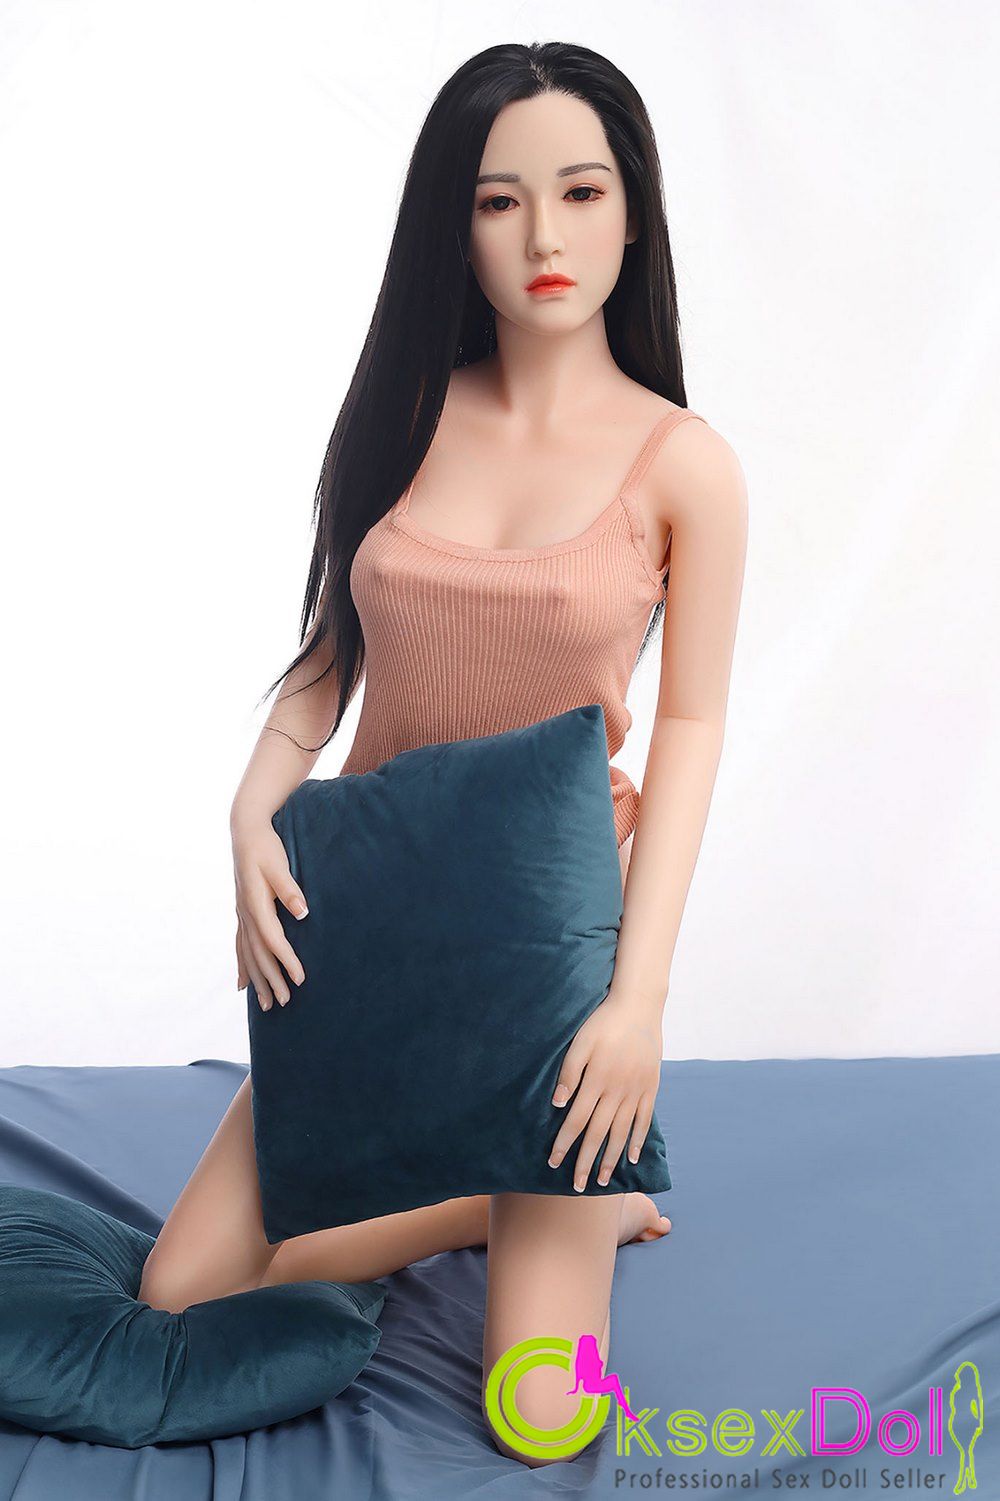 Small Tits TPE Silicone Love Doll Photos